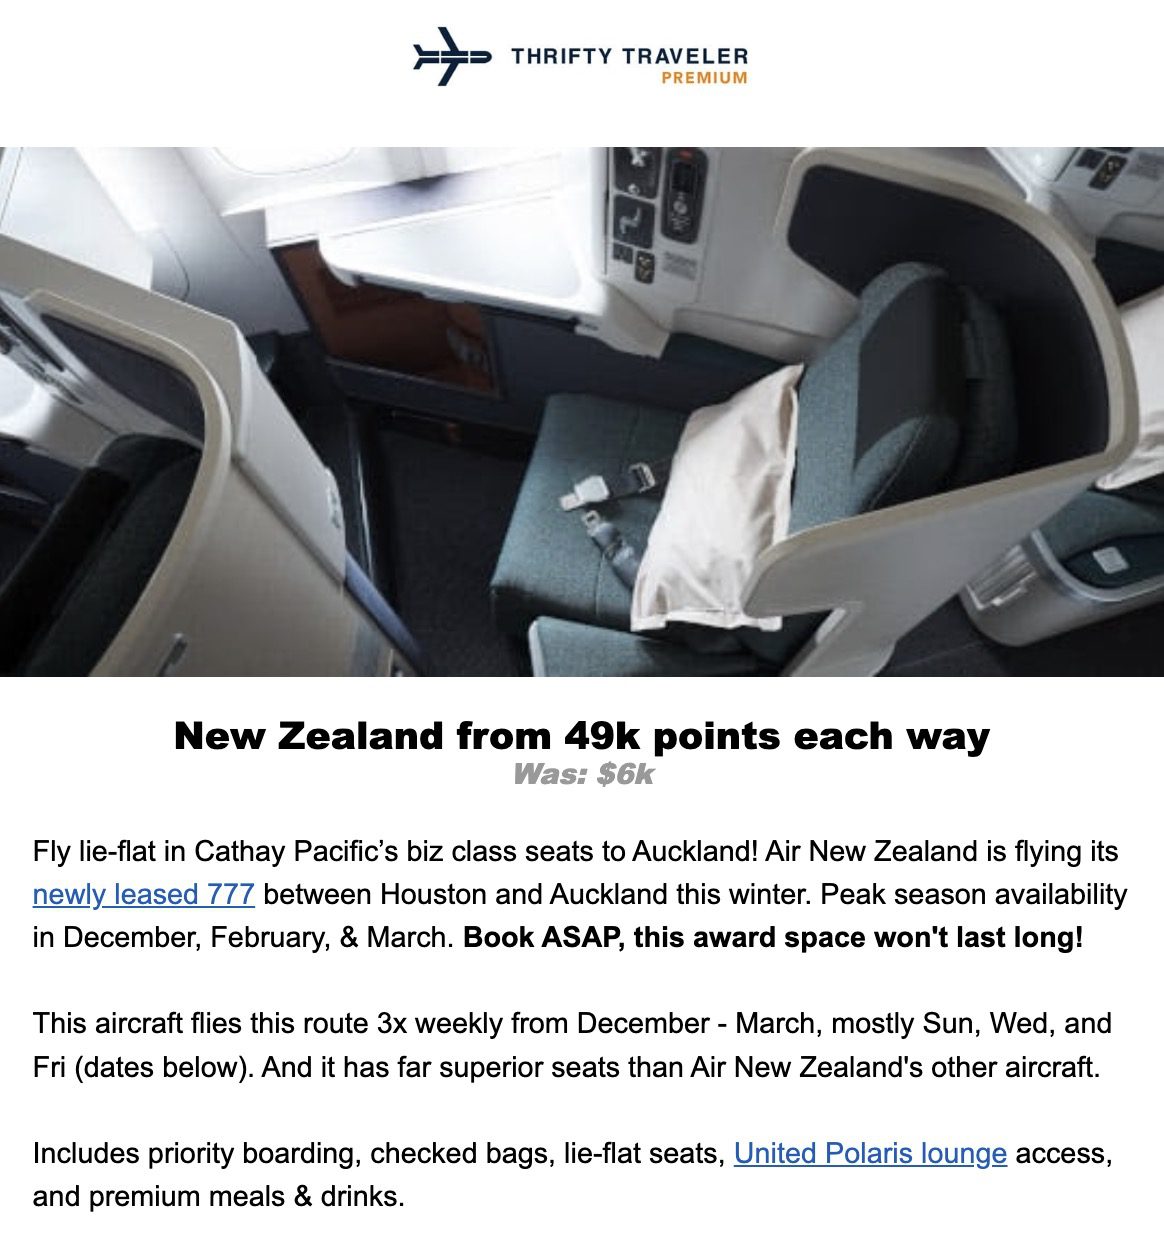 Houston to Auckland Air New Zealand